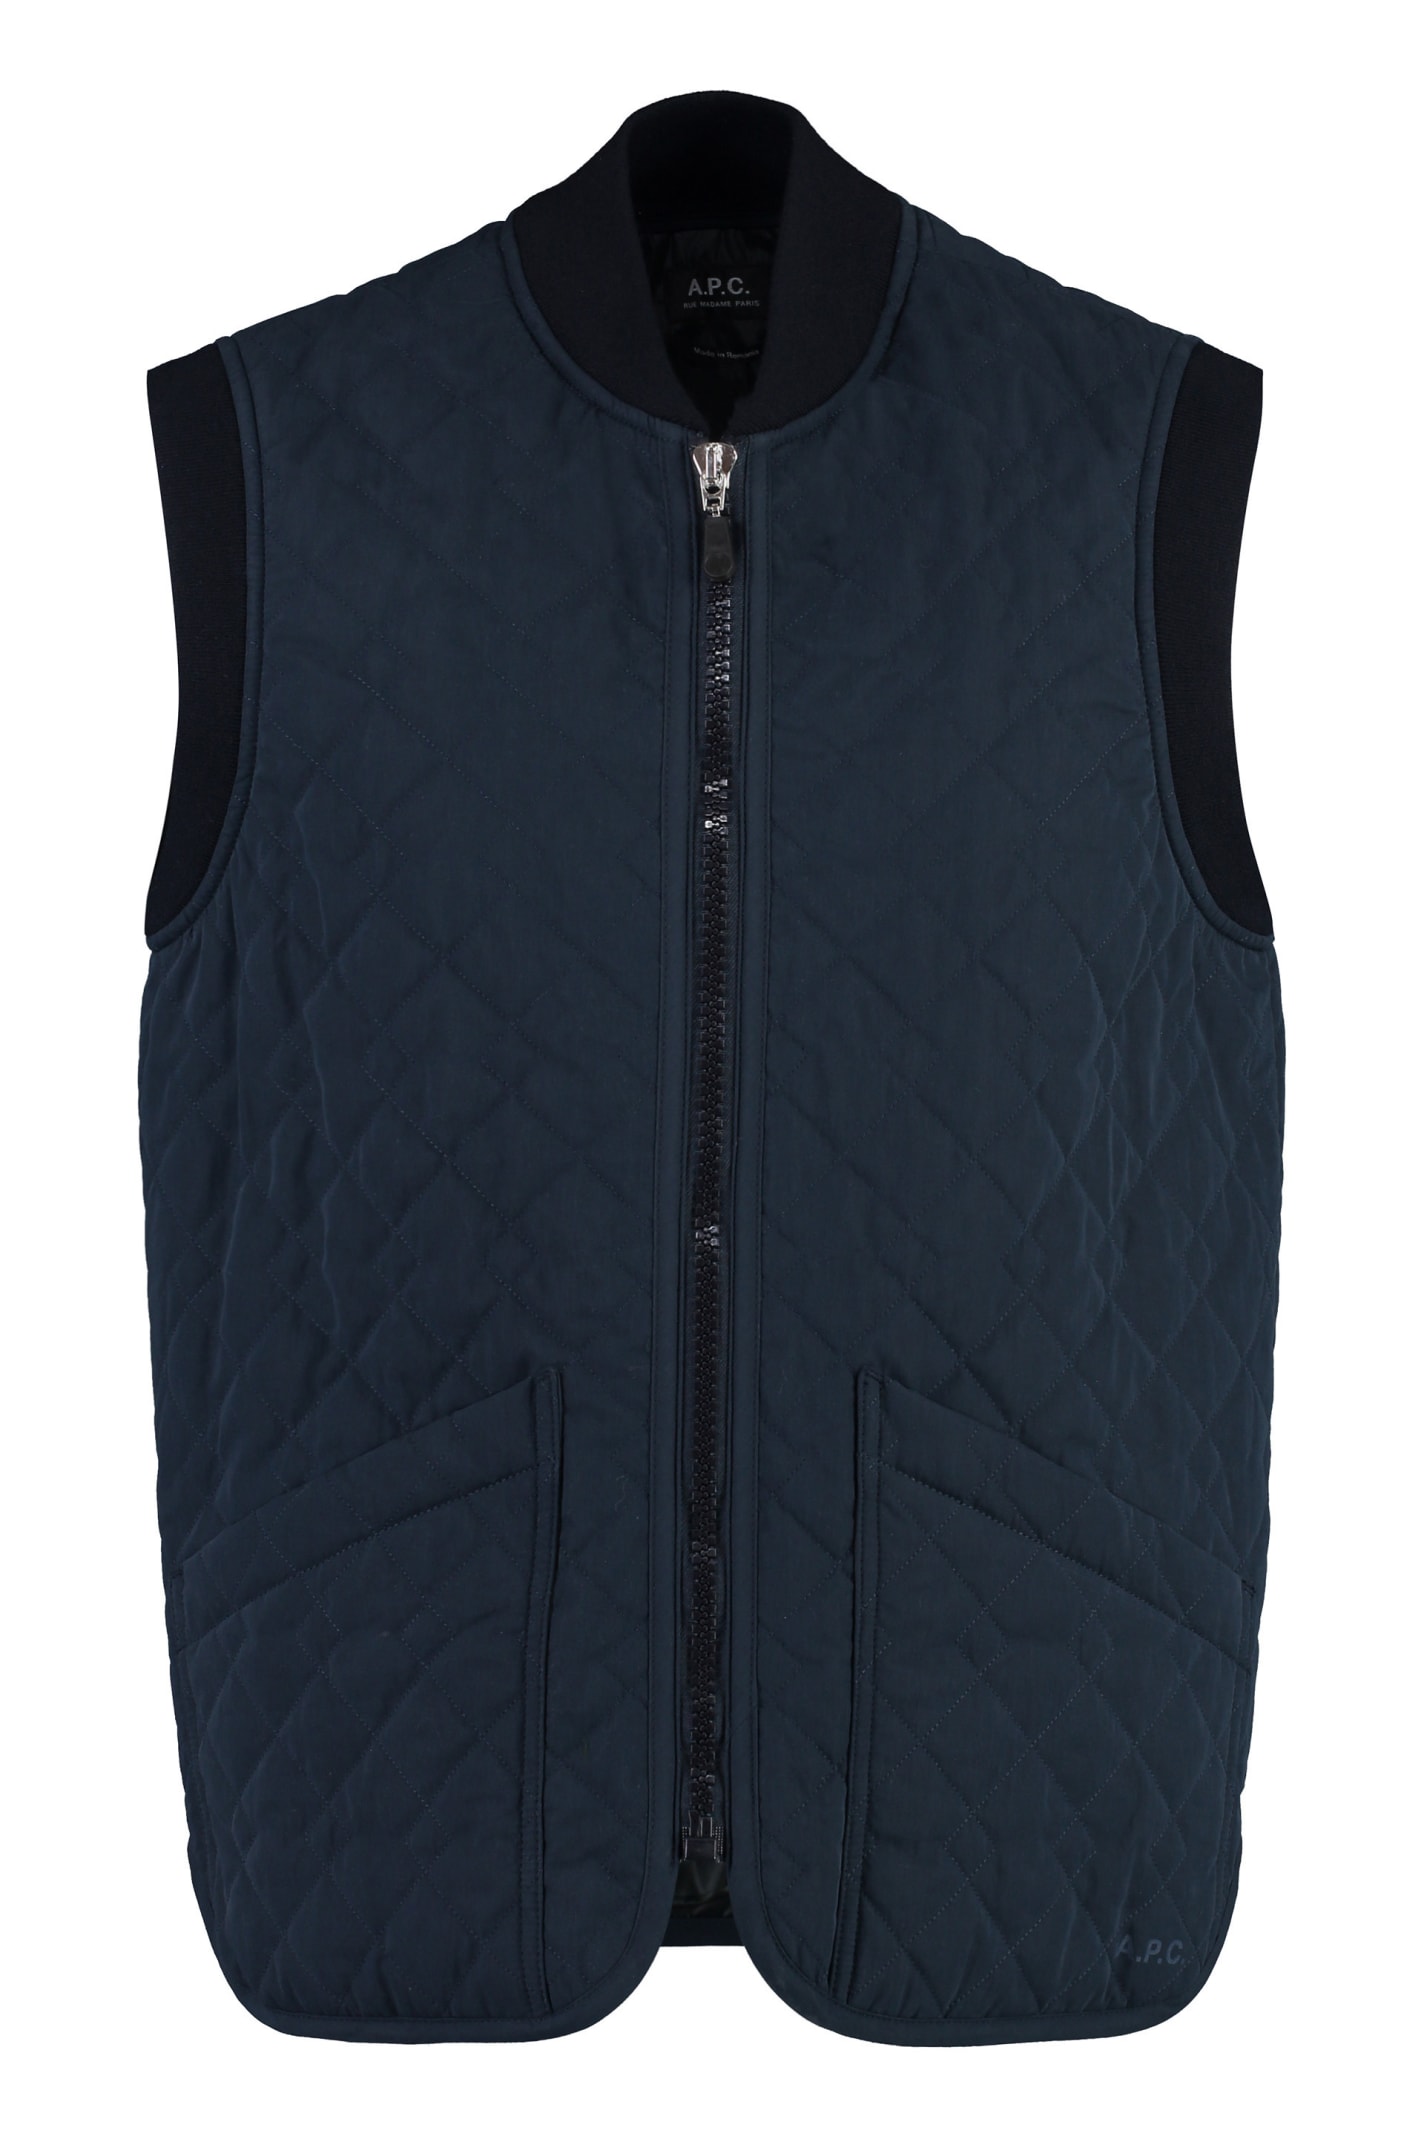 APC SILAS QUILTED waistcoat